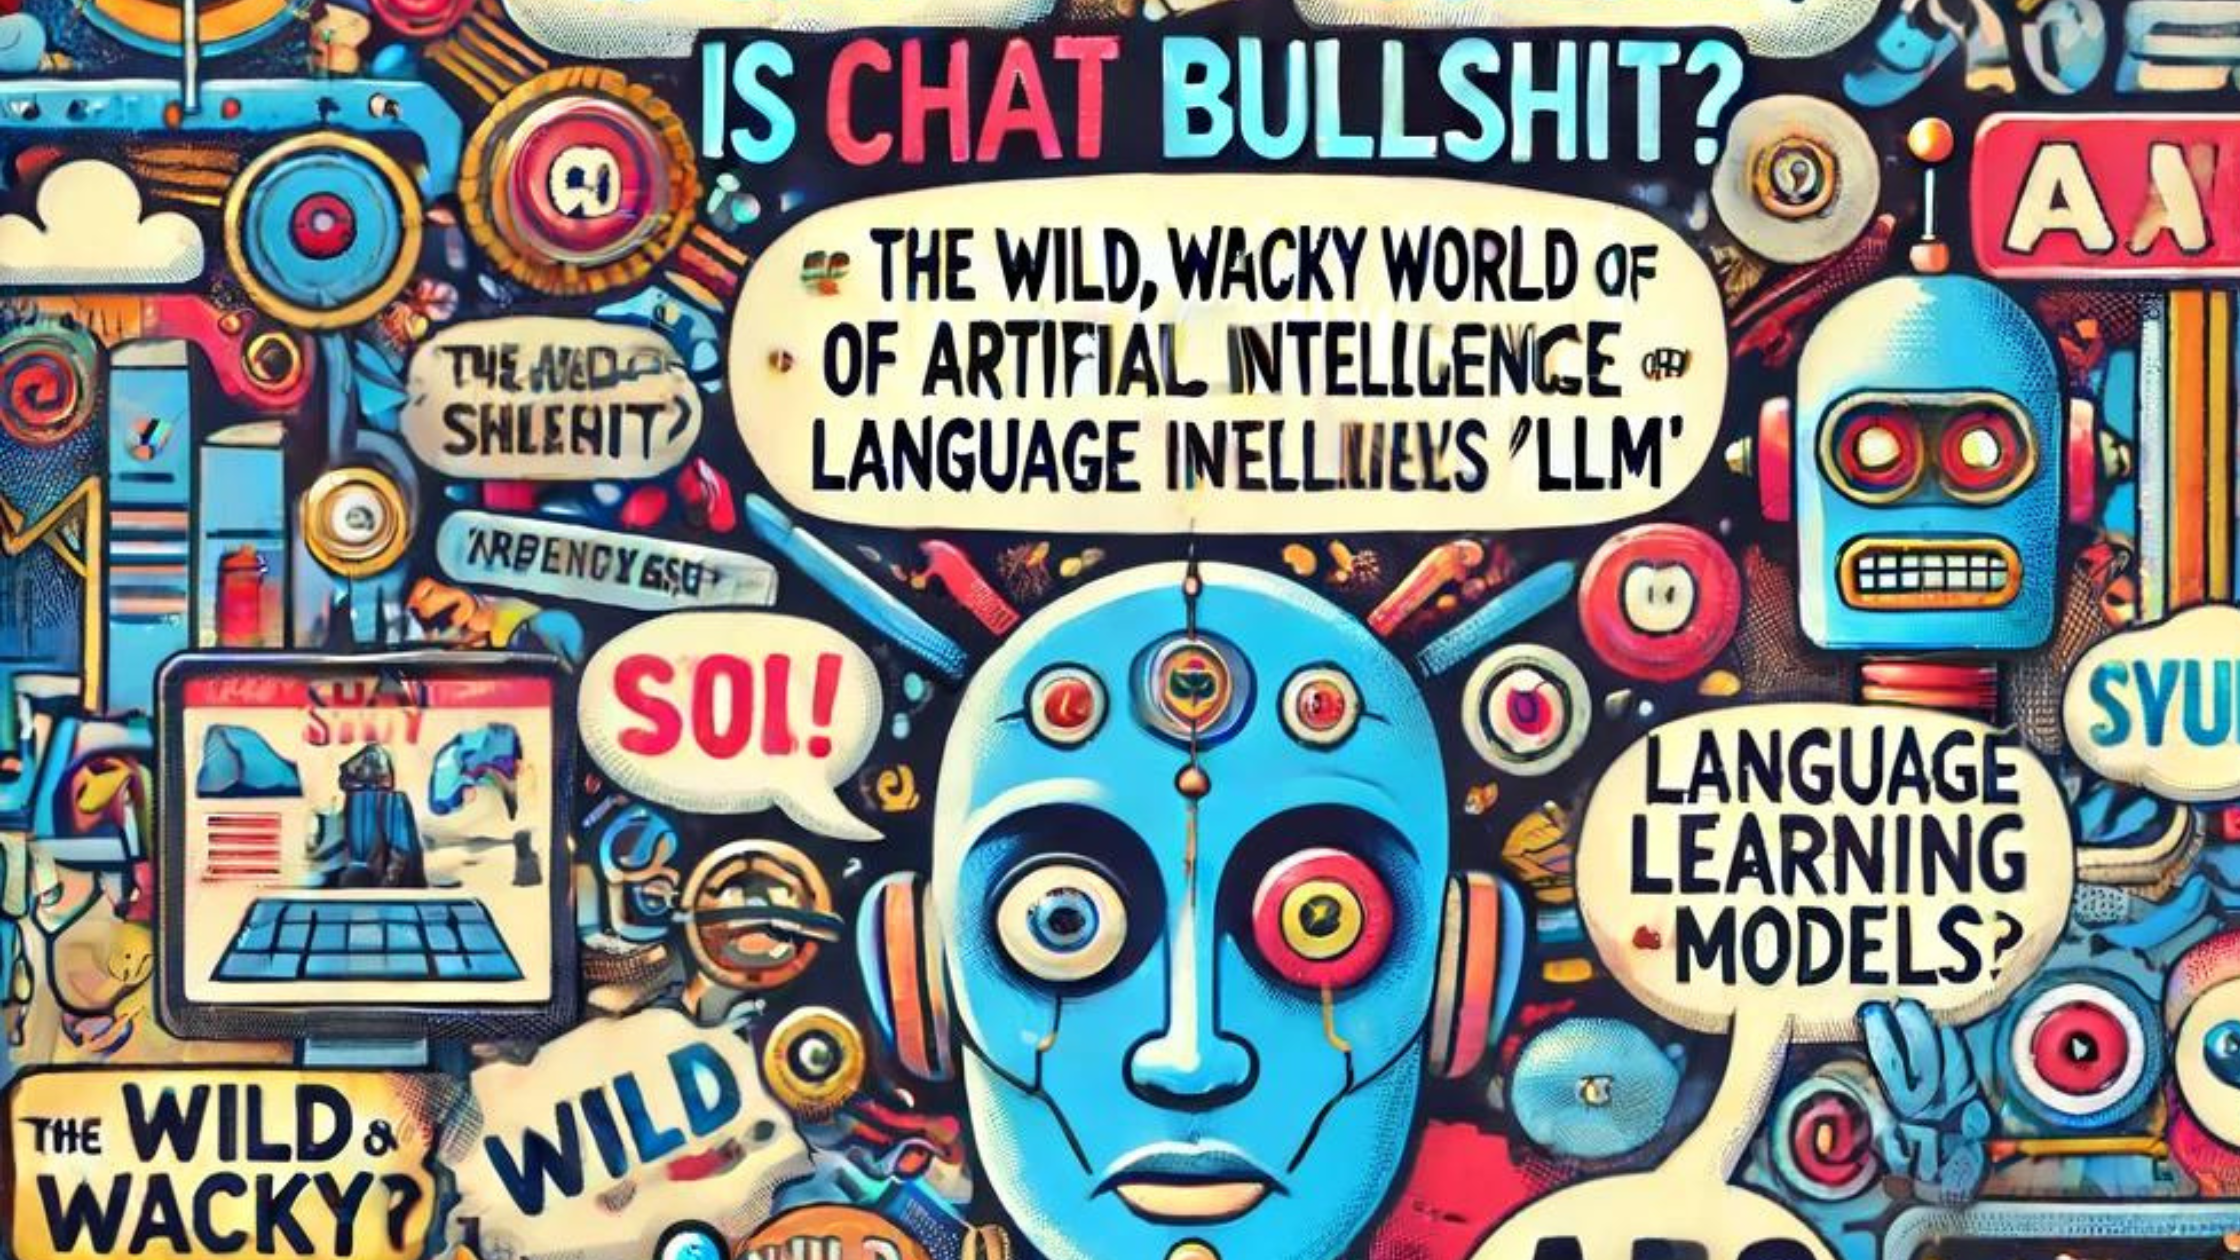 Is ChatGPT Bullshit? The Wild, Wacky World of Artificial Intelligence (AI) and Language Learning Models (LLM)